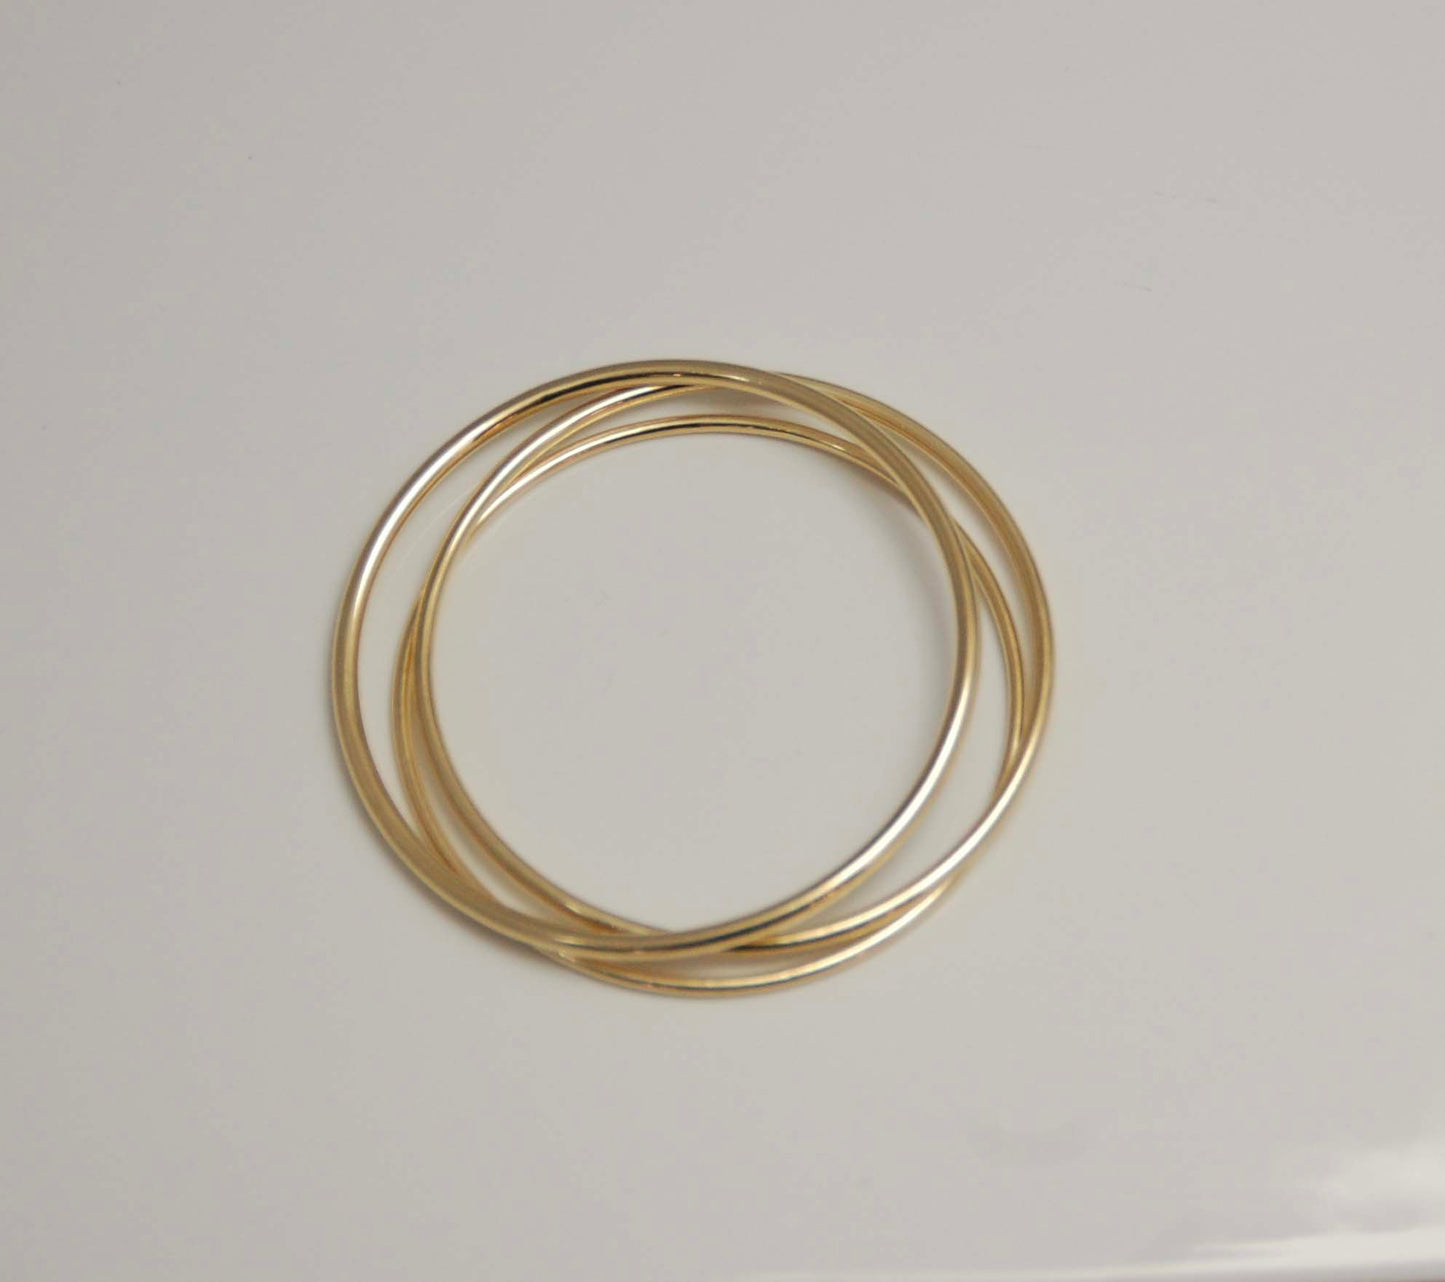 3 handmade solid gold bangles on white table